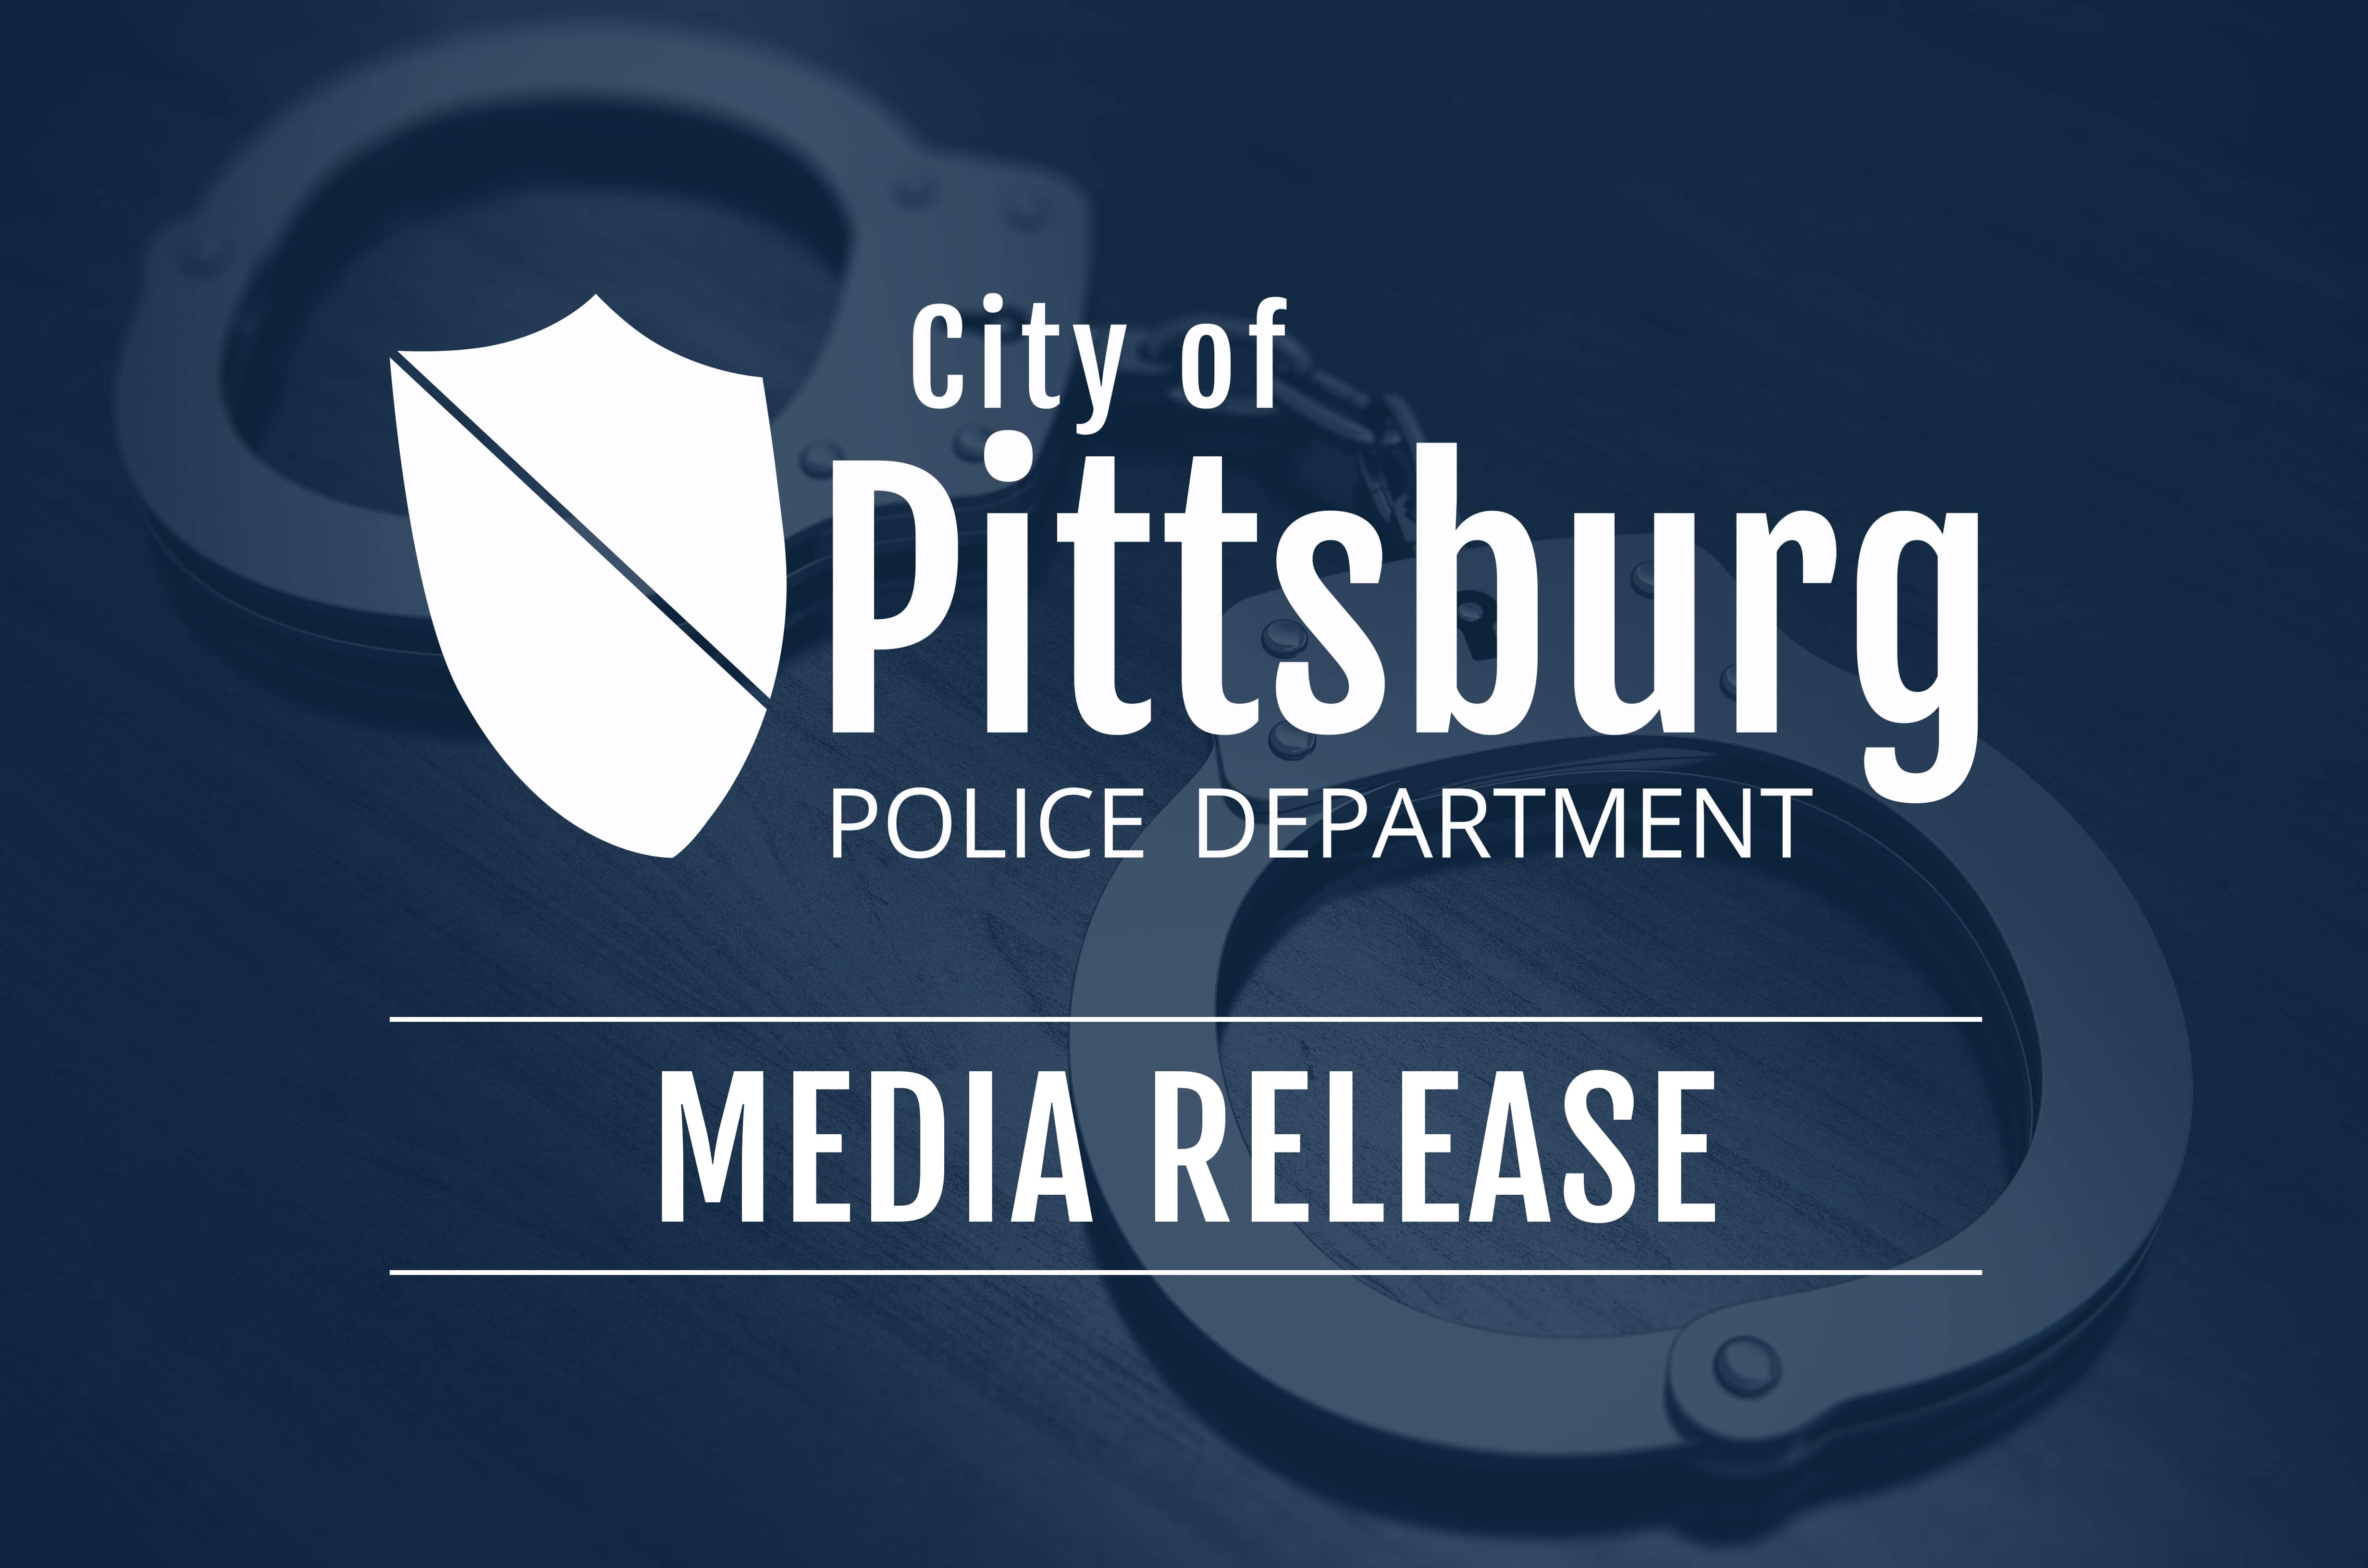 Two arrested after residential burglary